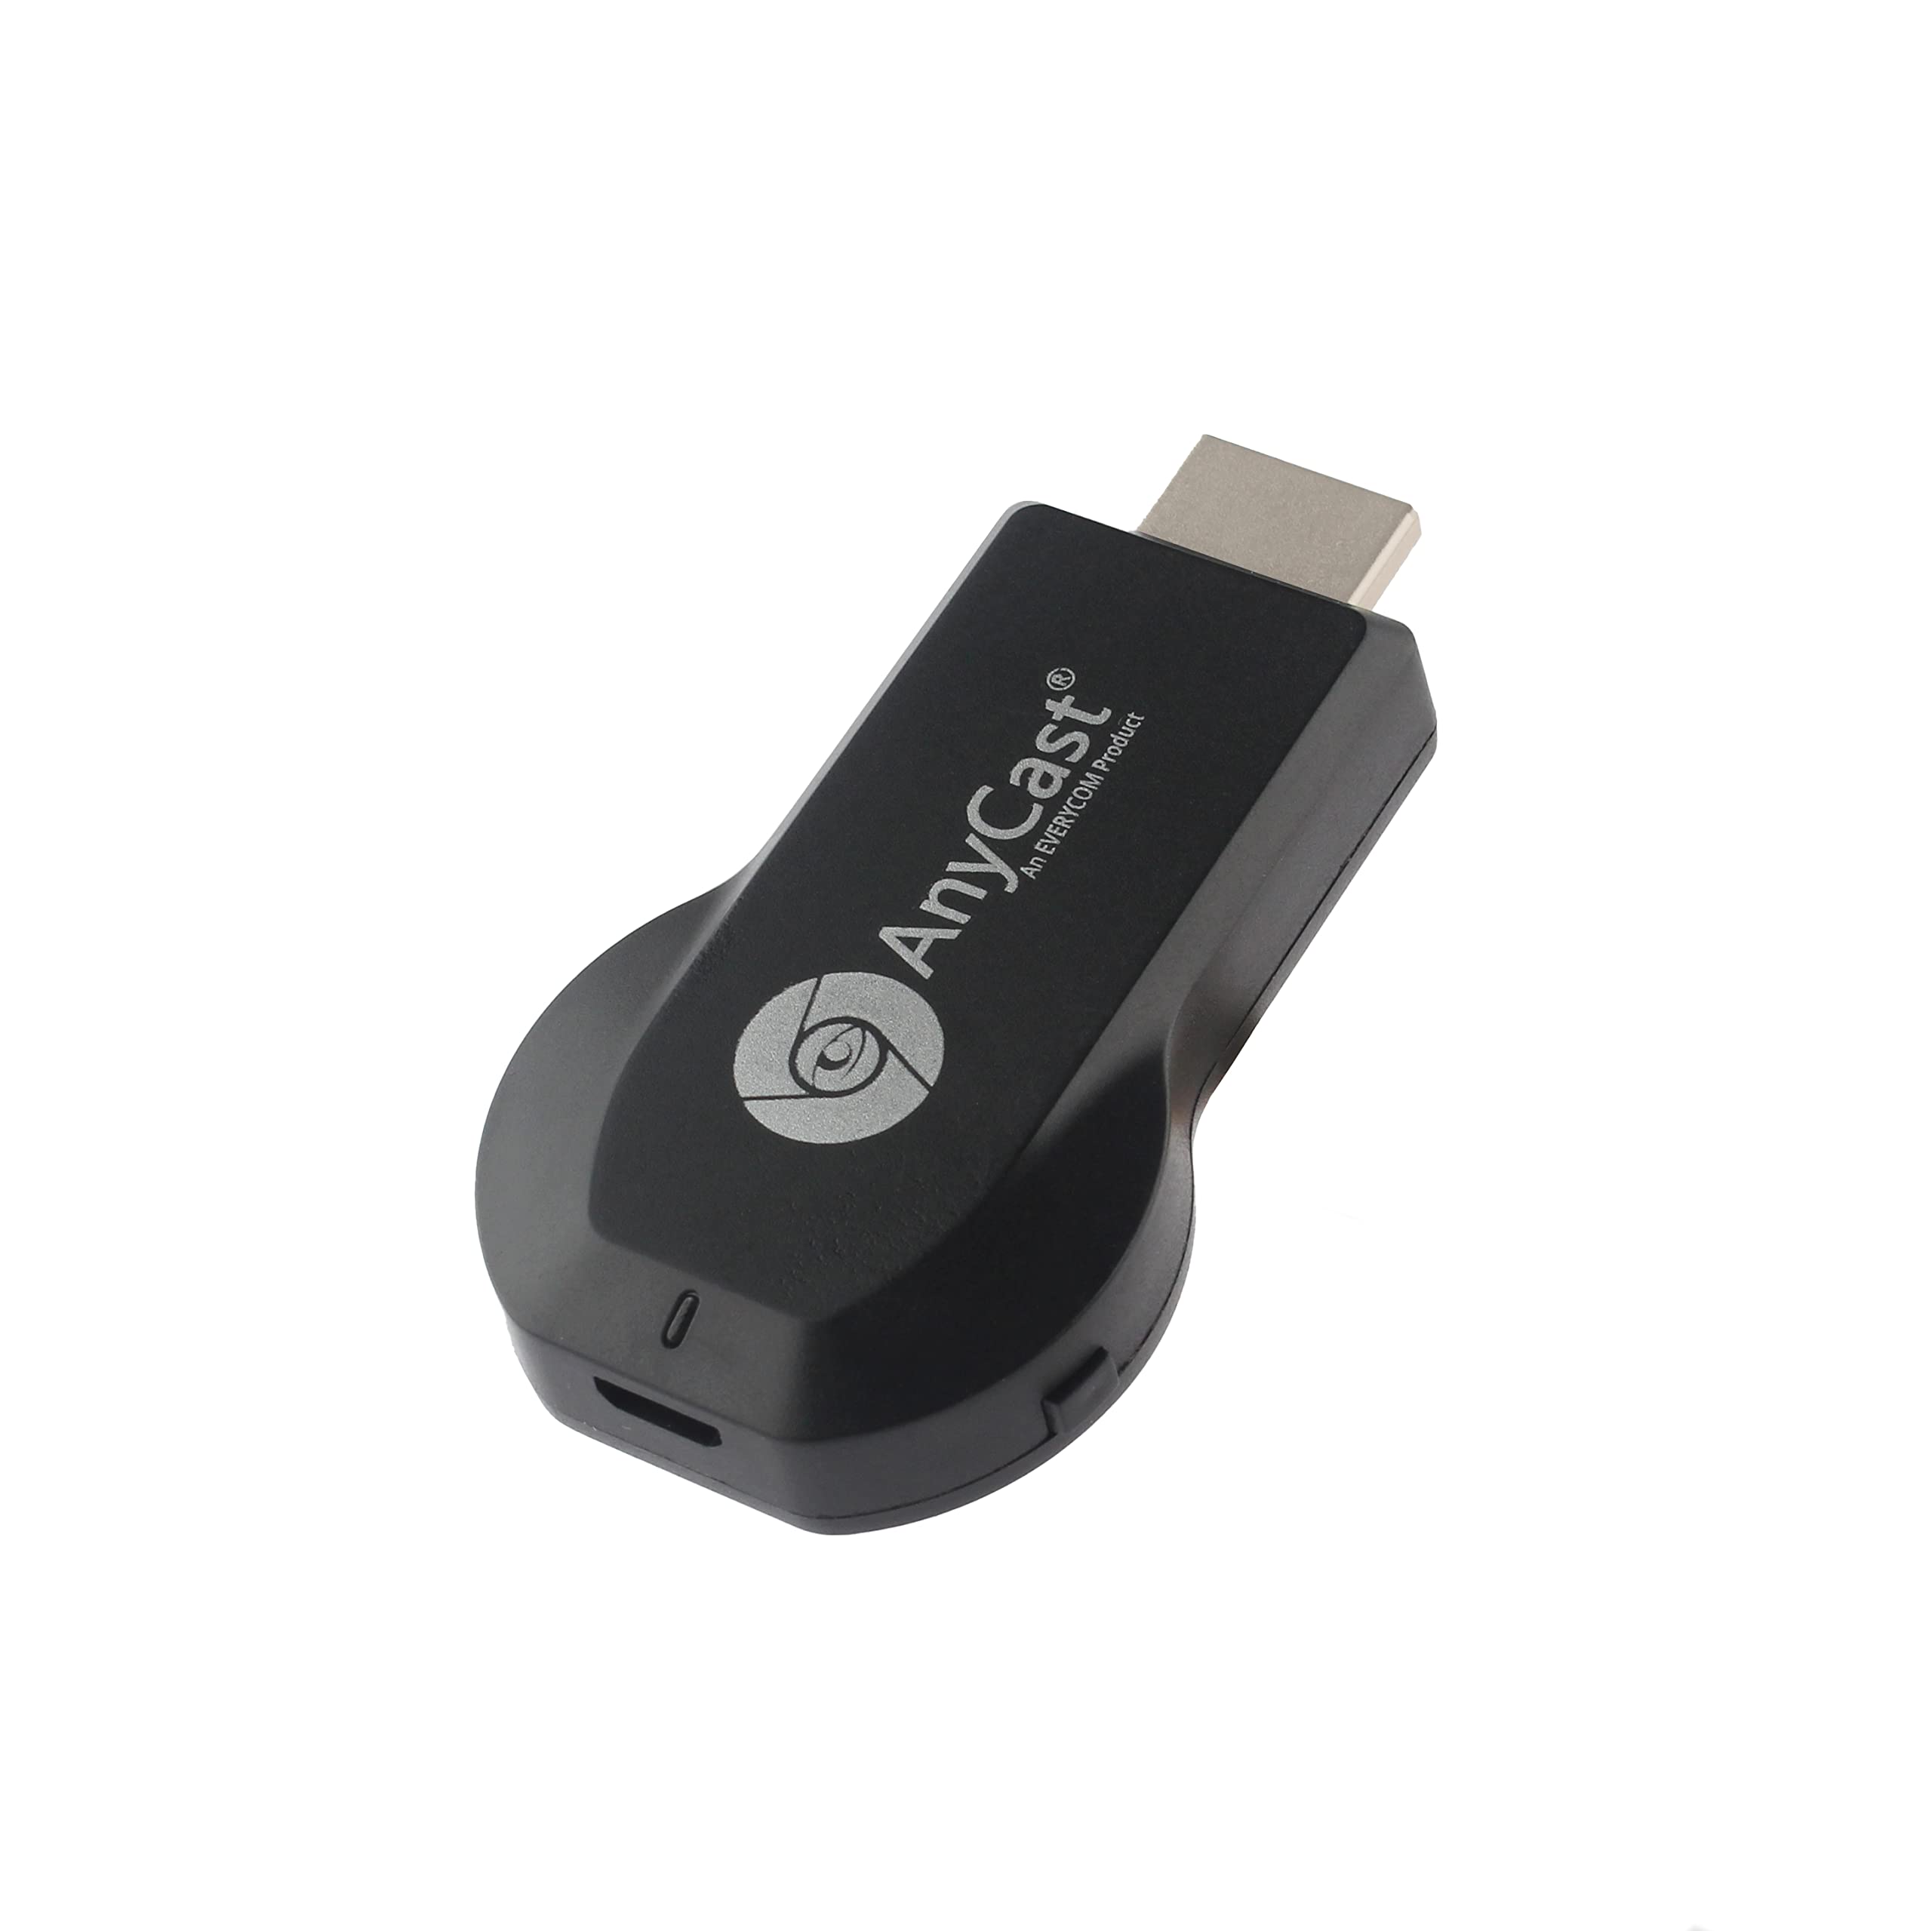 Effortless Setup Guide For Your Anycast Dongle